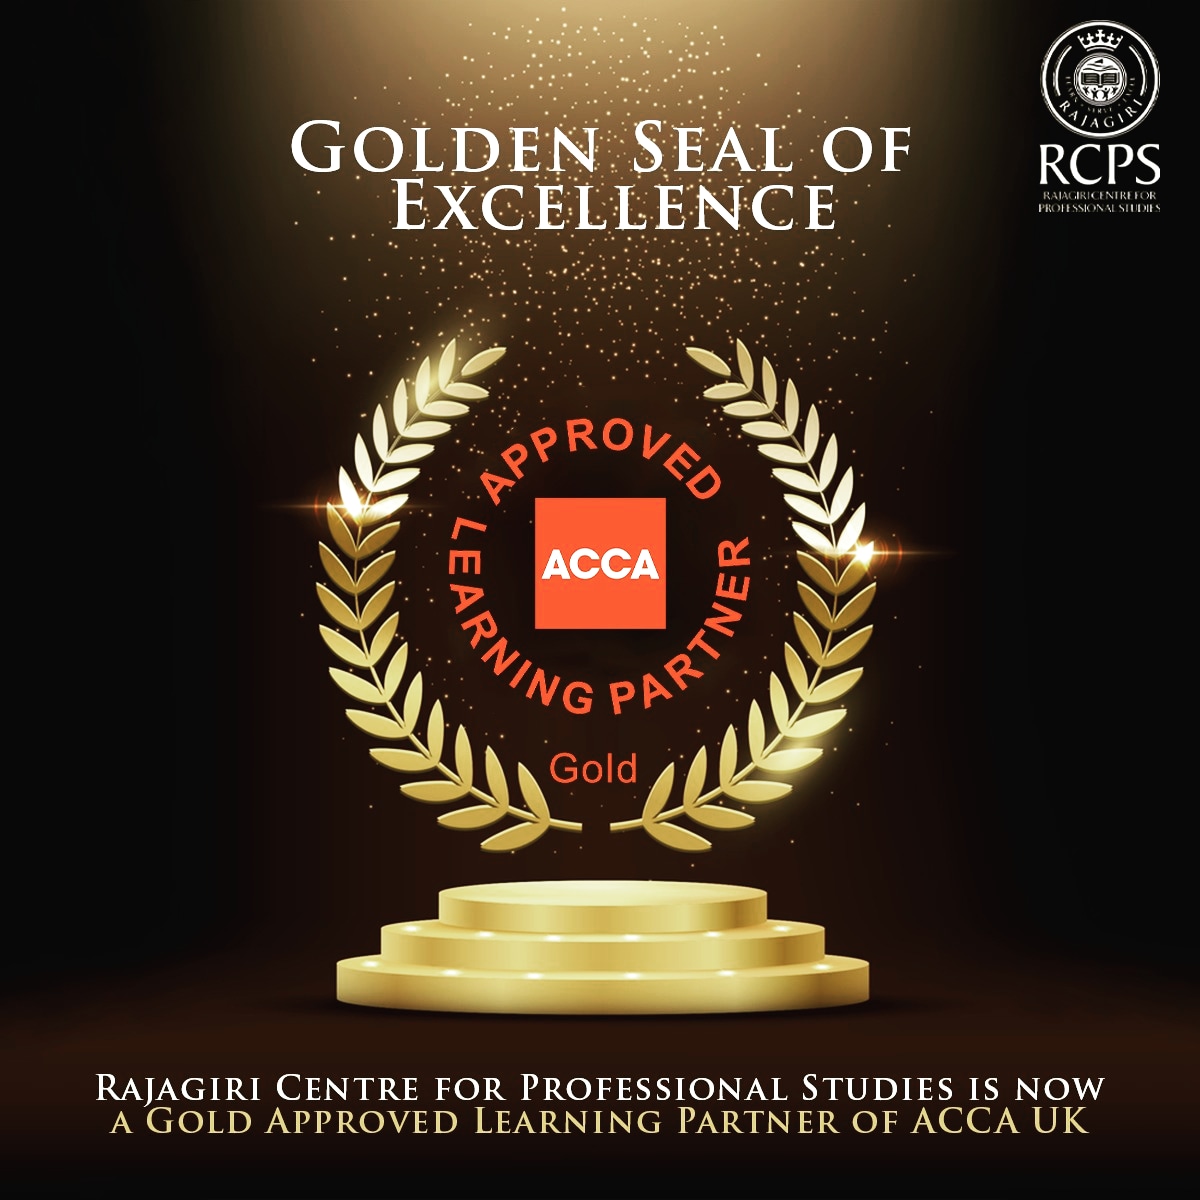 Golden Seal of Excellence